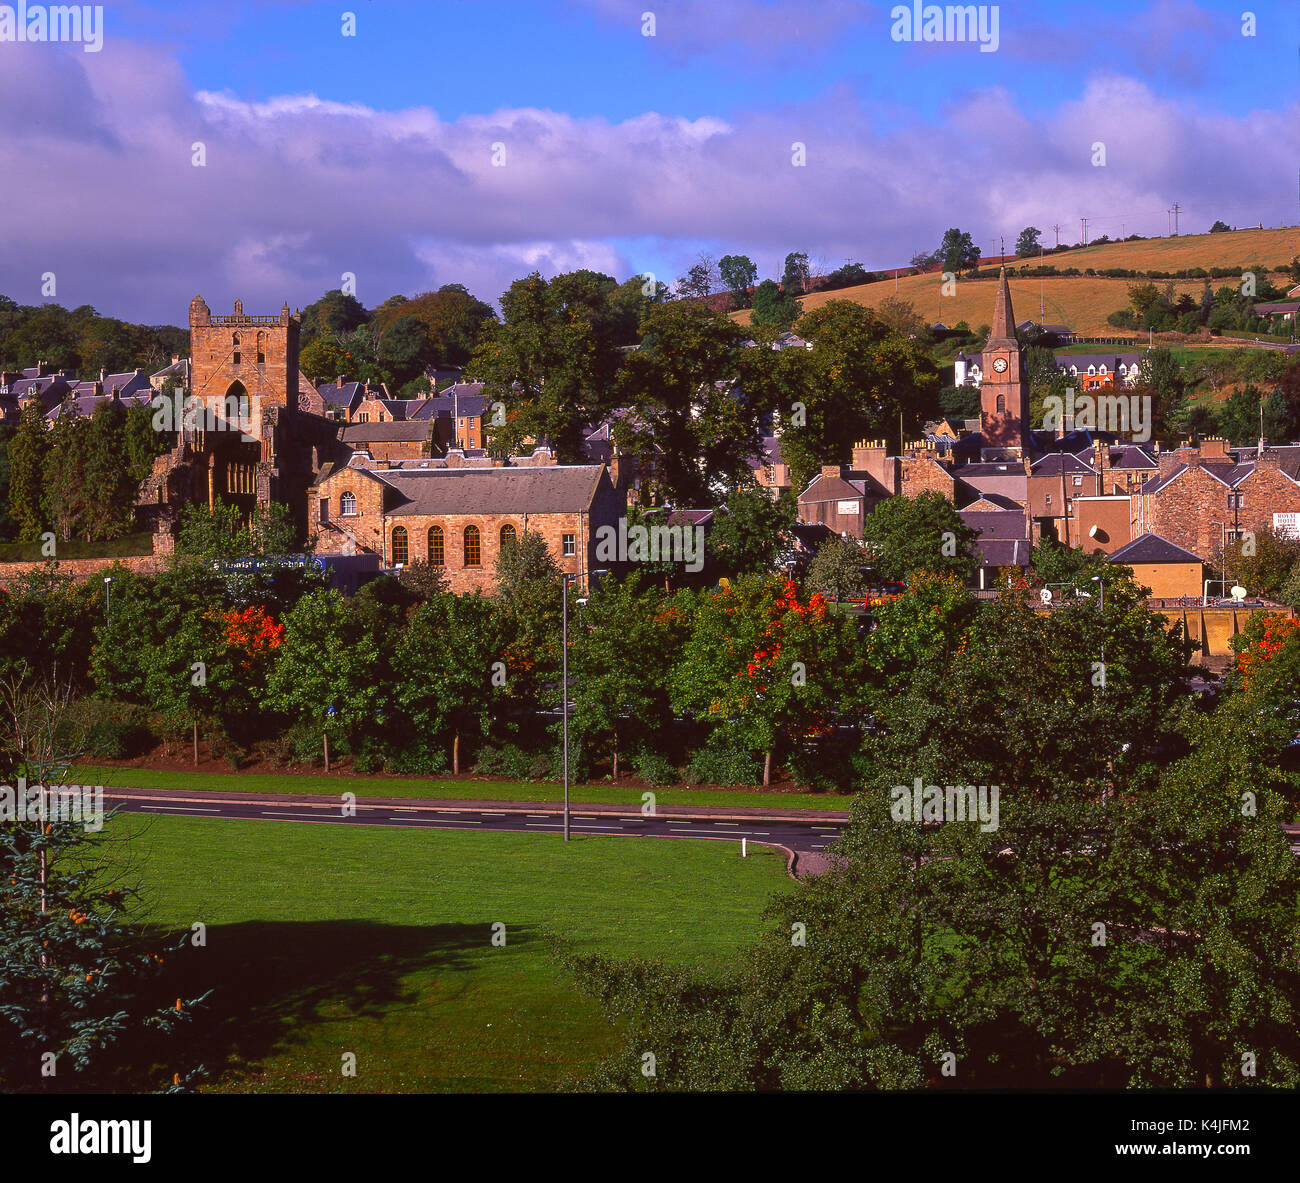 An unusual view of Jedburgh Abbey and town which is situated on the main route north from England, Jedburgh, Scottish Borders Stock Photo